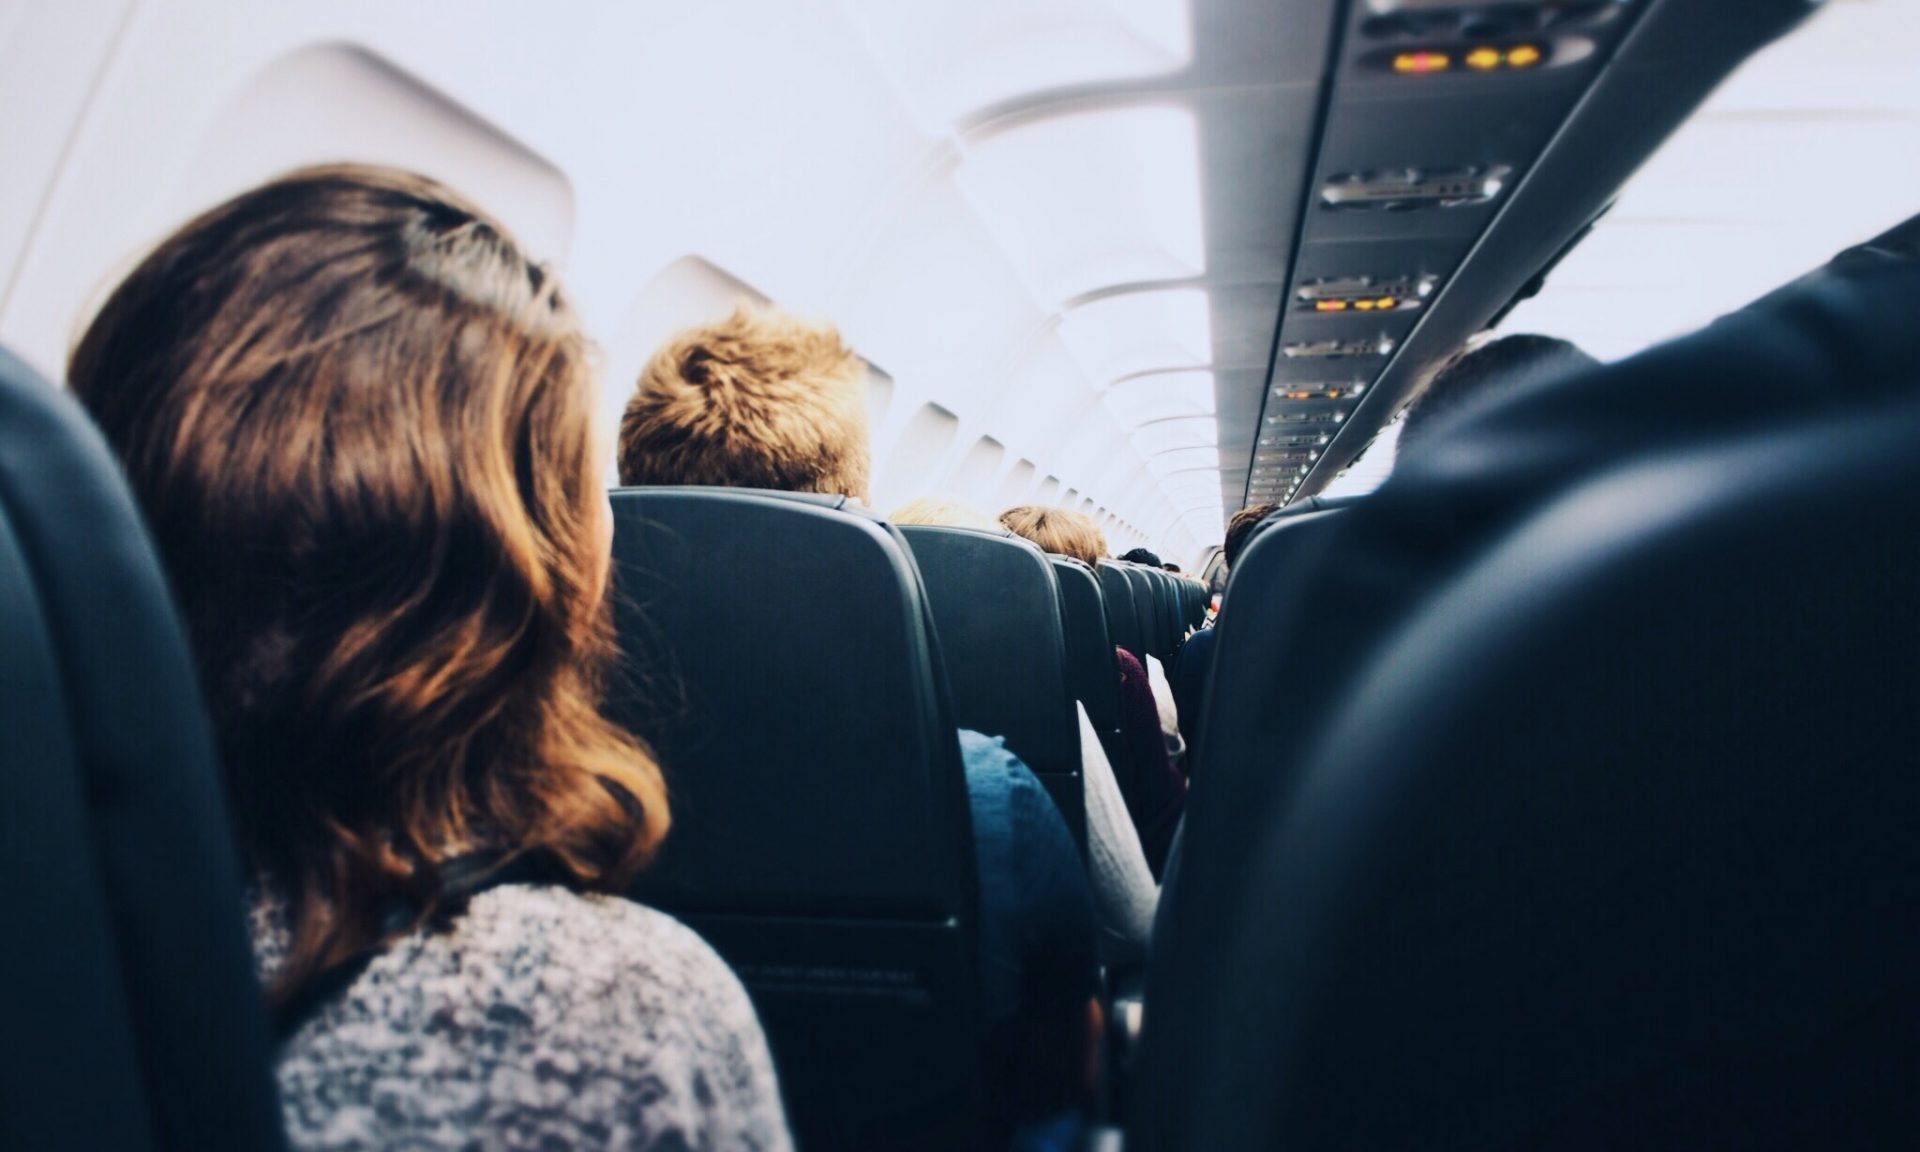 Woman Shares How to Get Even Comfier on a Plane: 'One of the Best